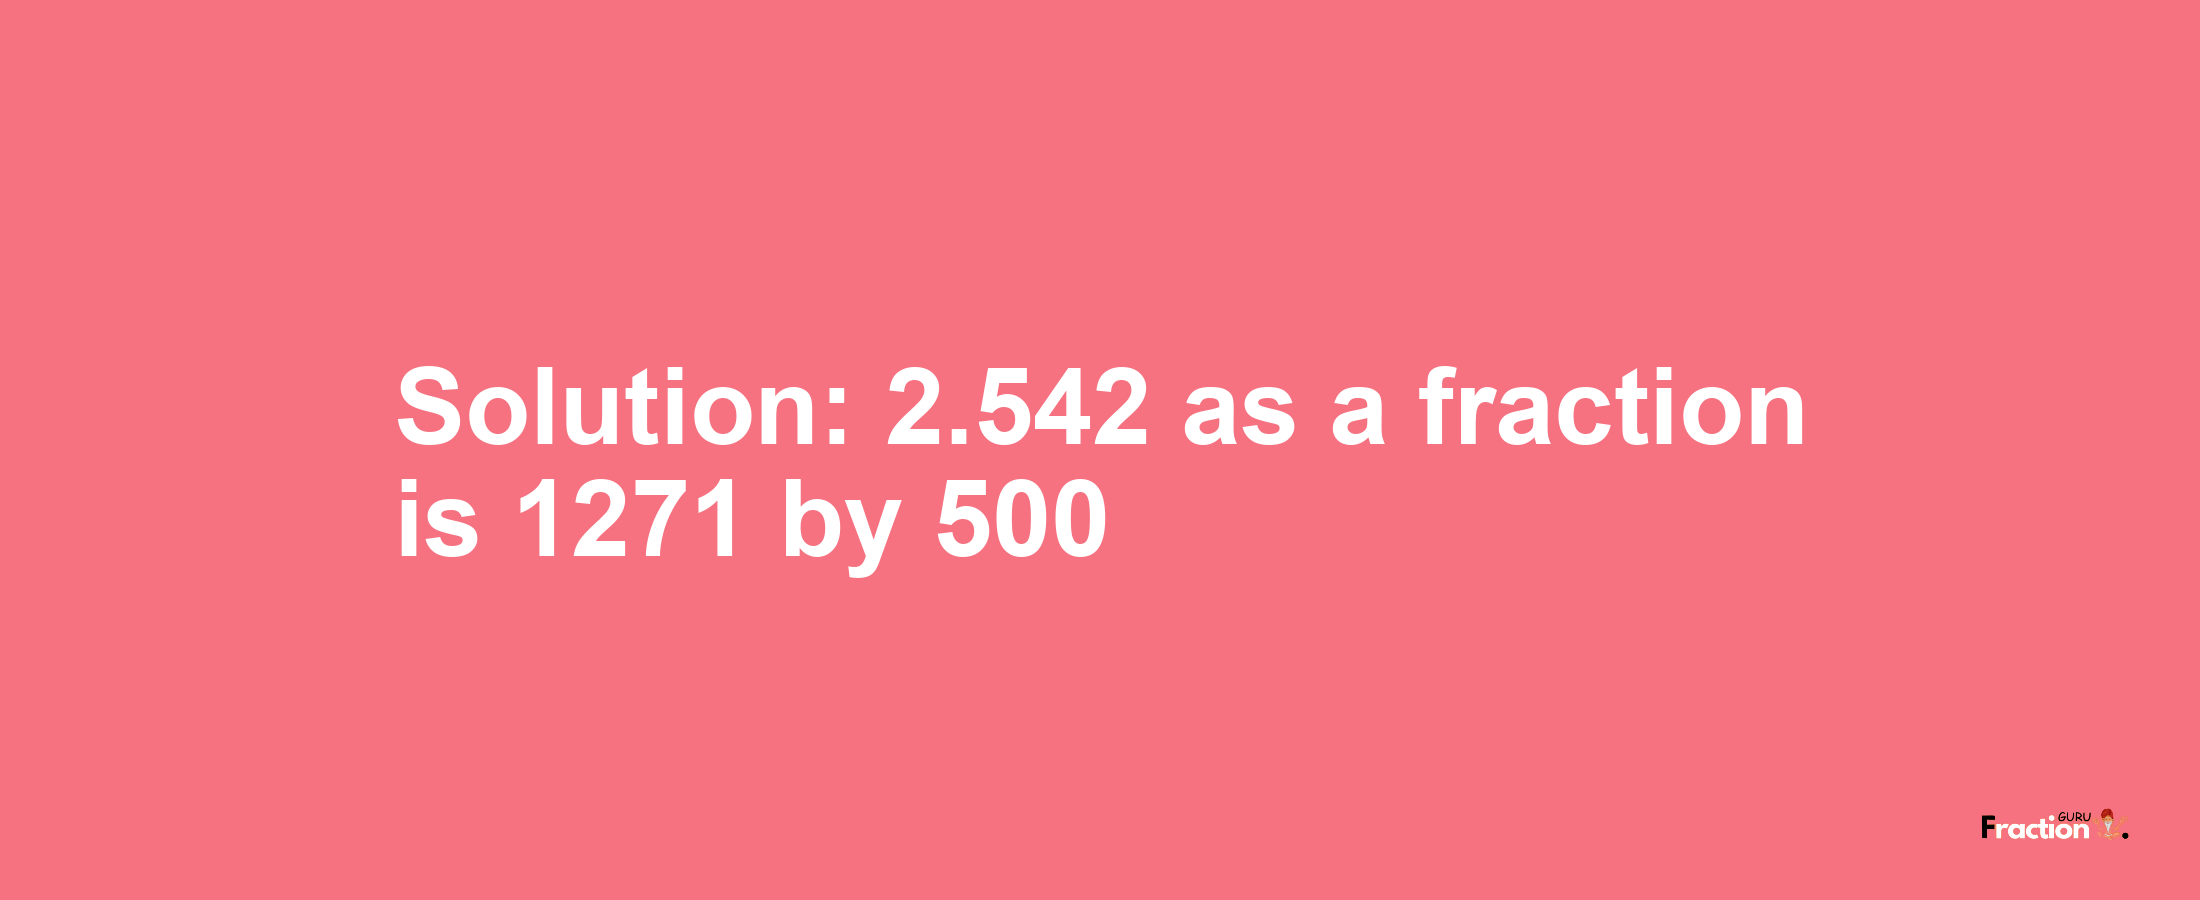 Solution:2.542 as a fraction is 1271/500